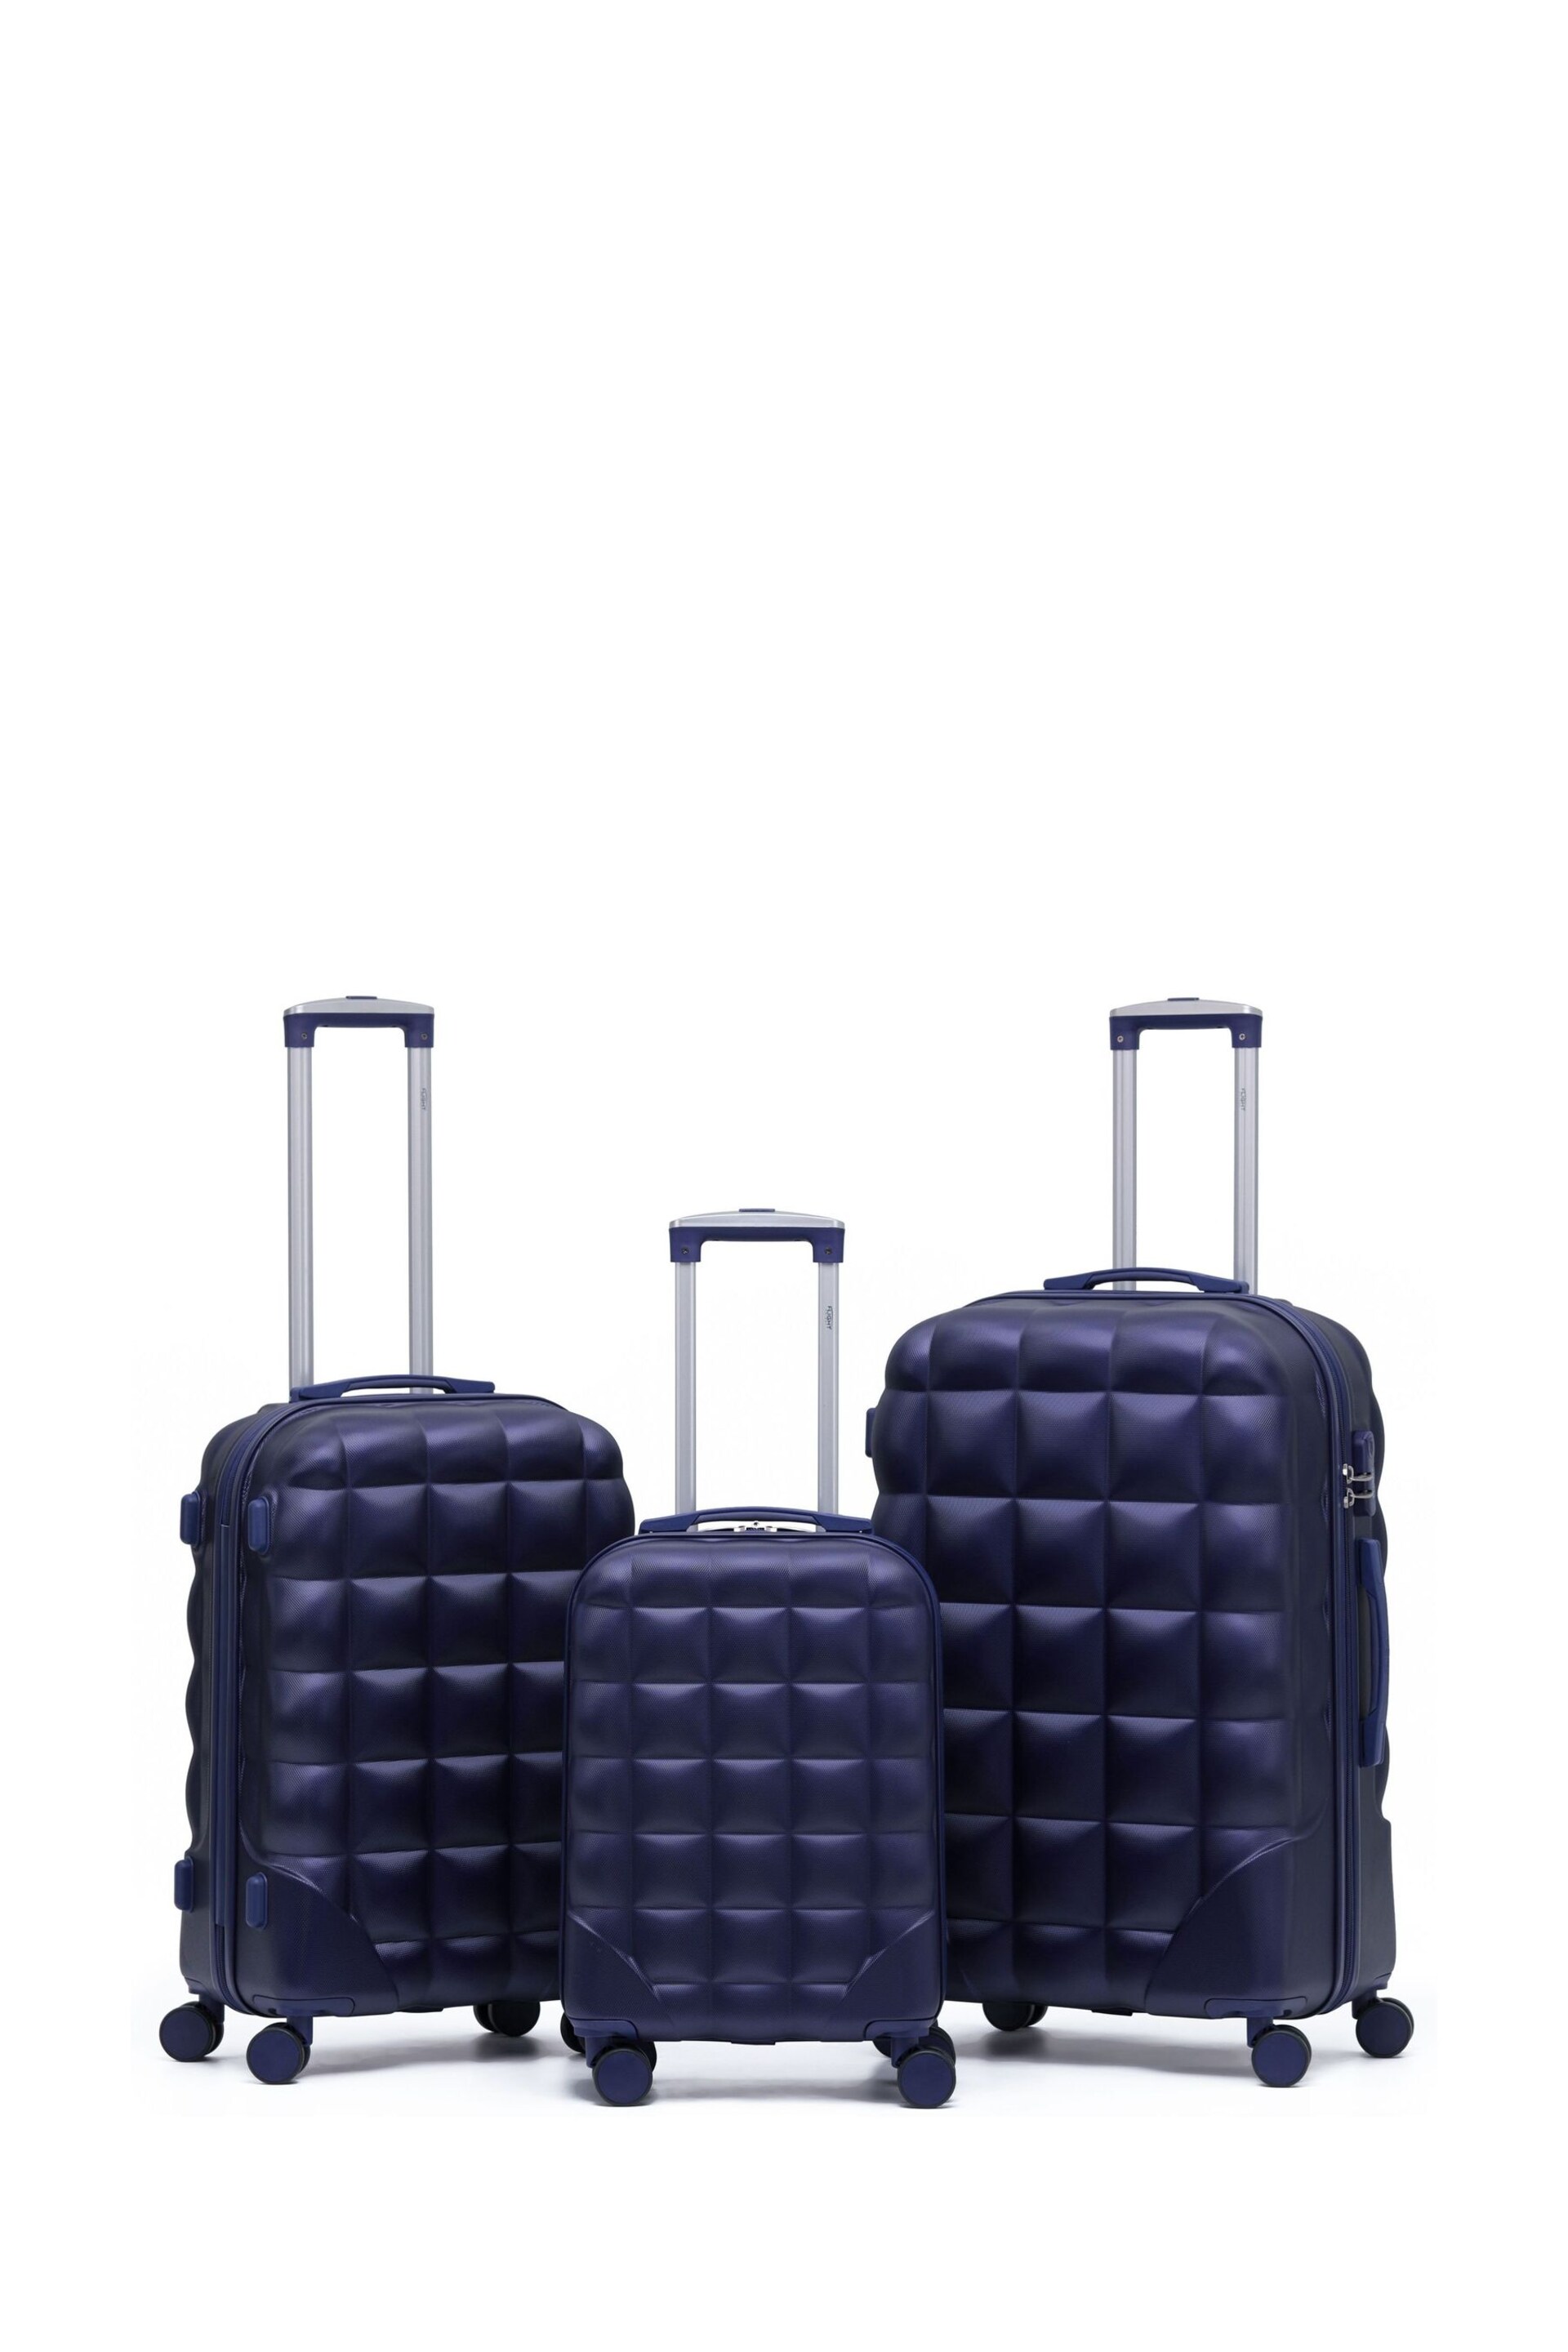 Flight Knight Hardcase Large Check in Suitcases and Cabin Case Black/Silver Set of 3 - Image 1 of 7